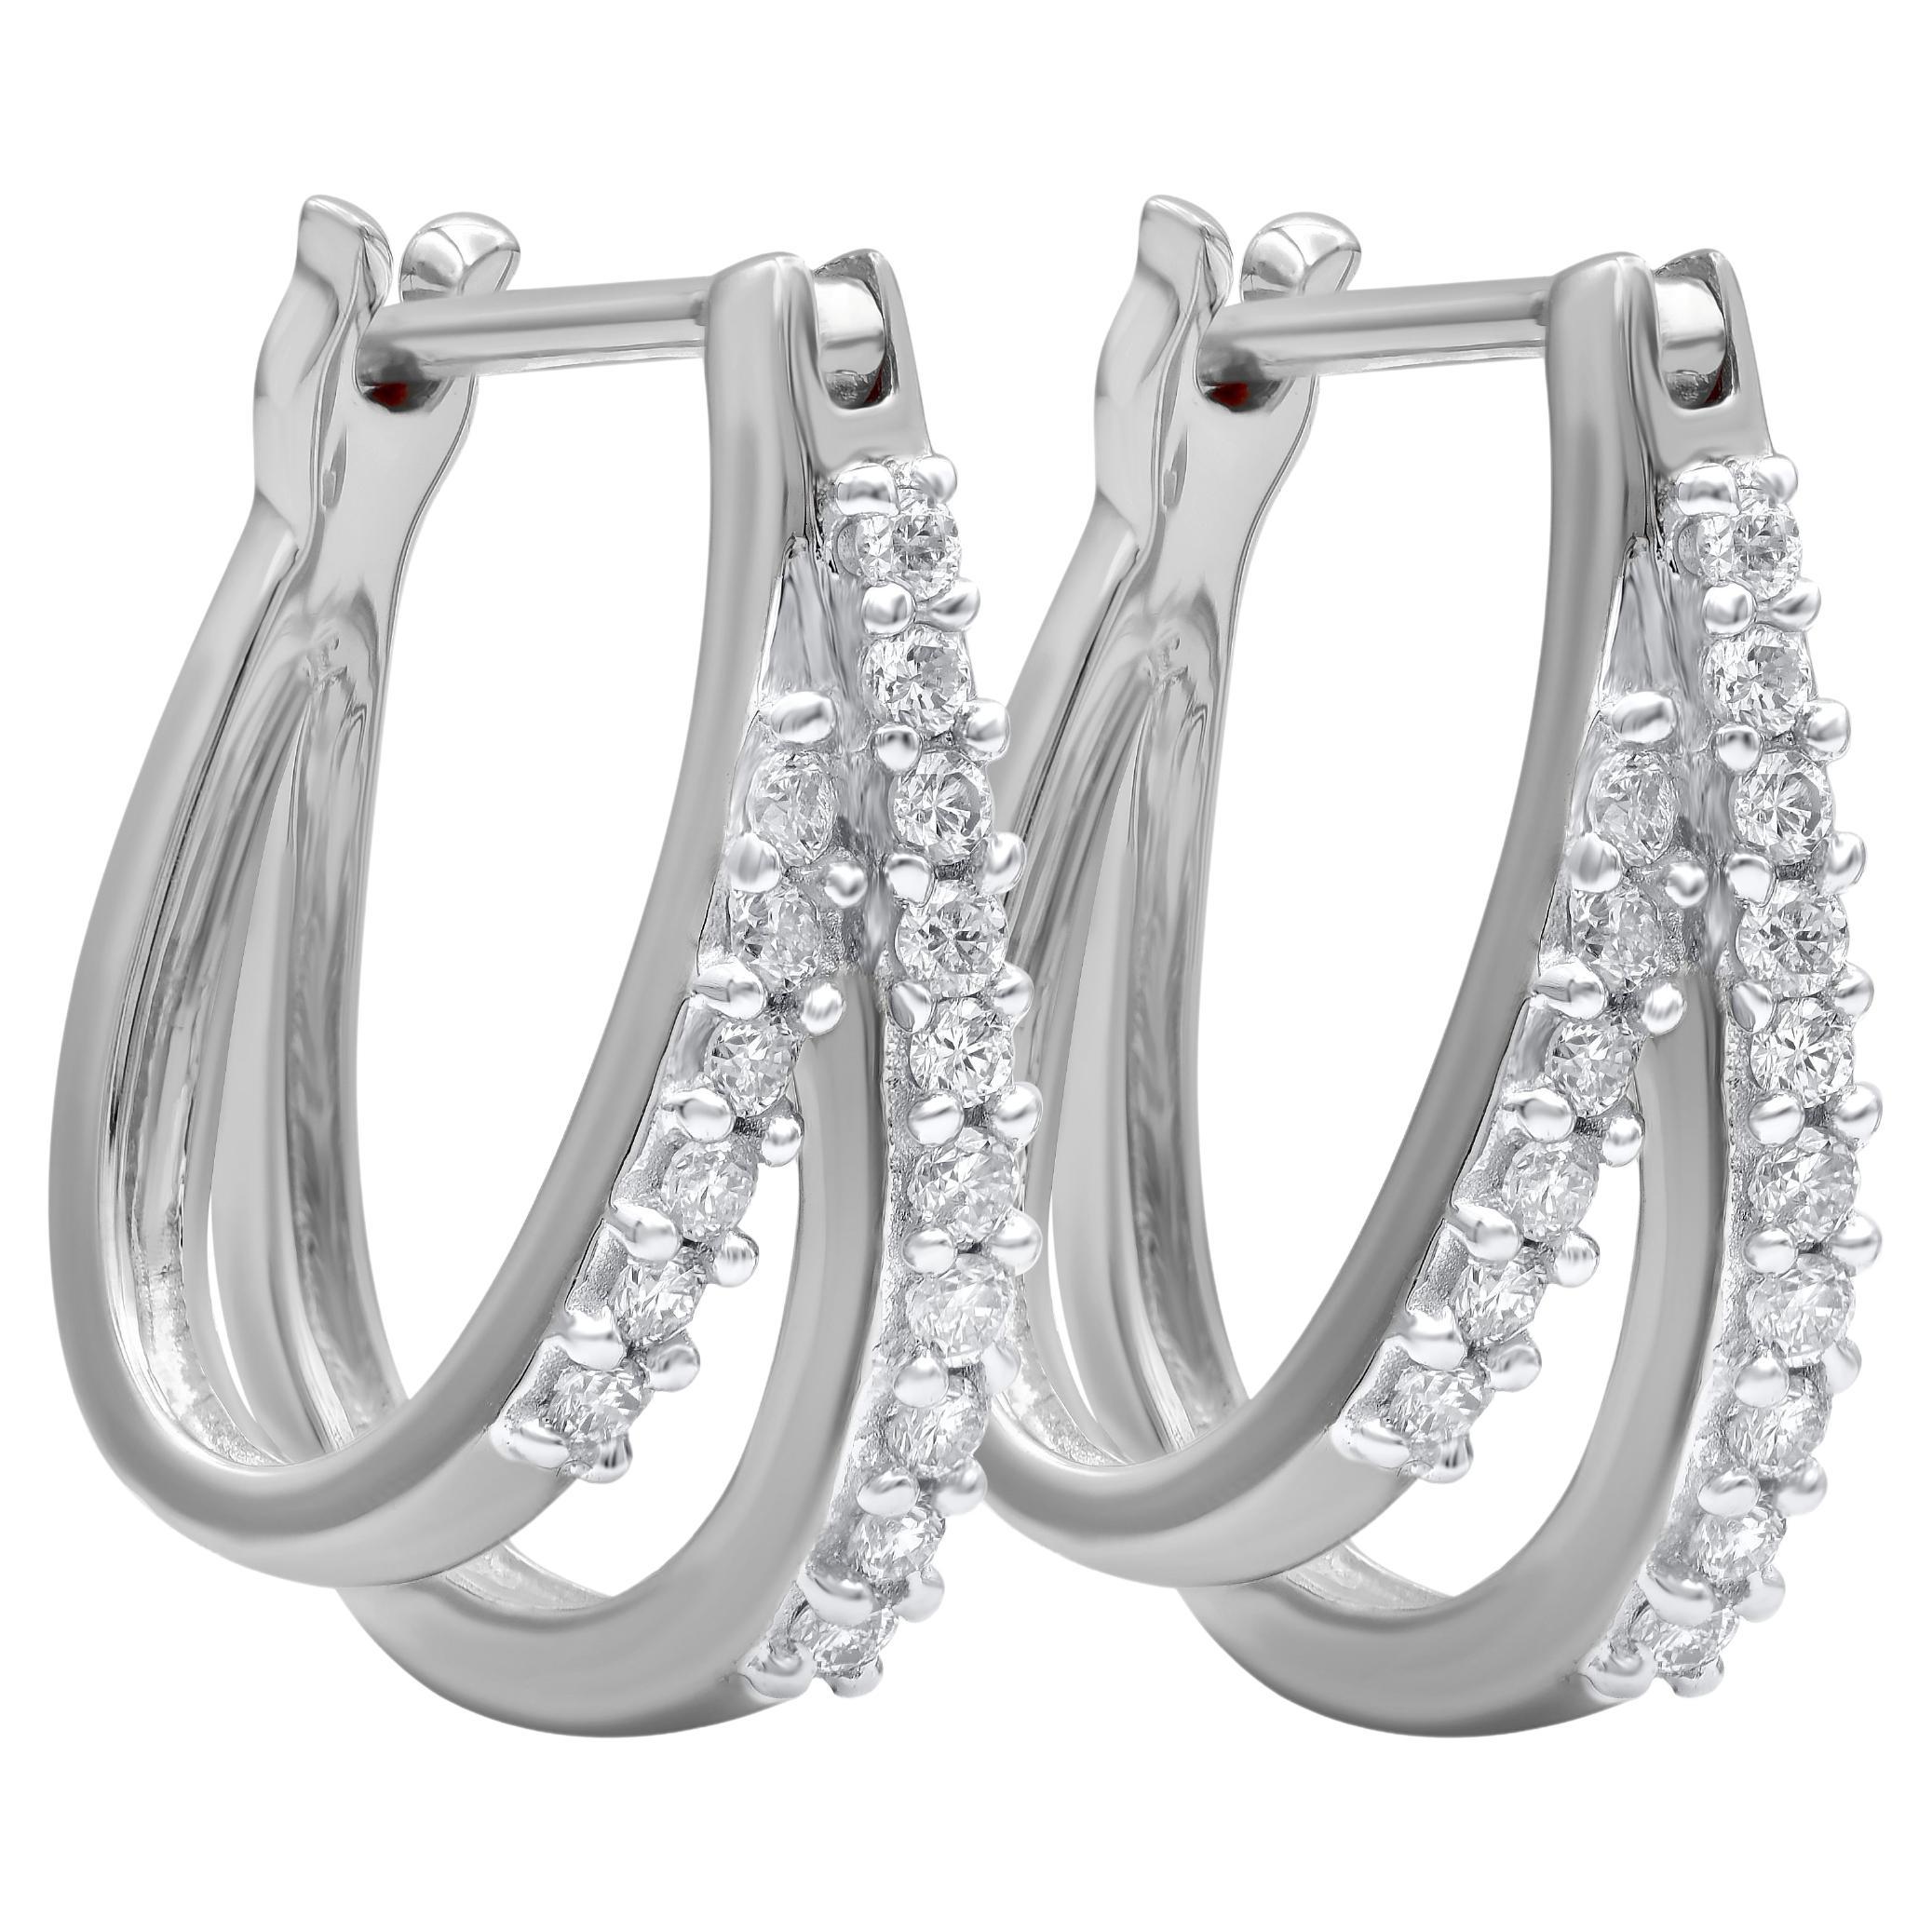 Bring charm to your look with this diamond hoop earrings. This earring is beautifully designed and studded with 32 brilliant cut round diamond set in ribbon setting. We only use natural, 100% conflict free diamonds which shines in H-I Color and I-2